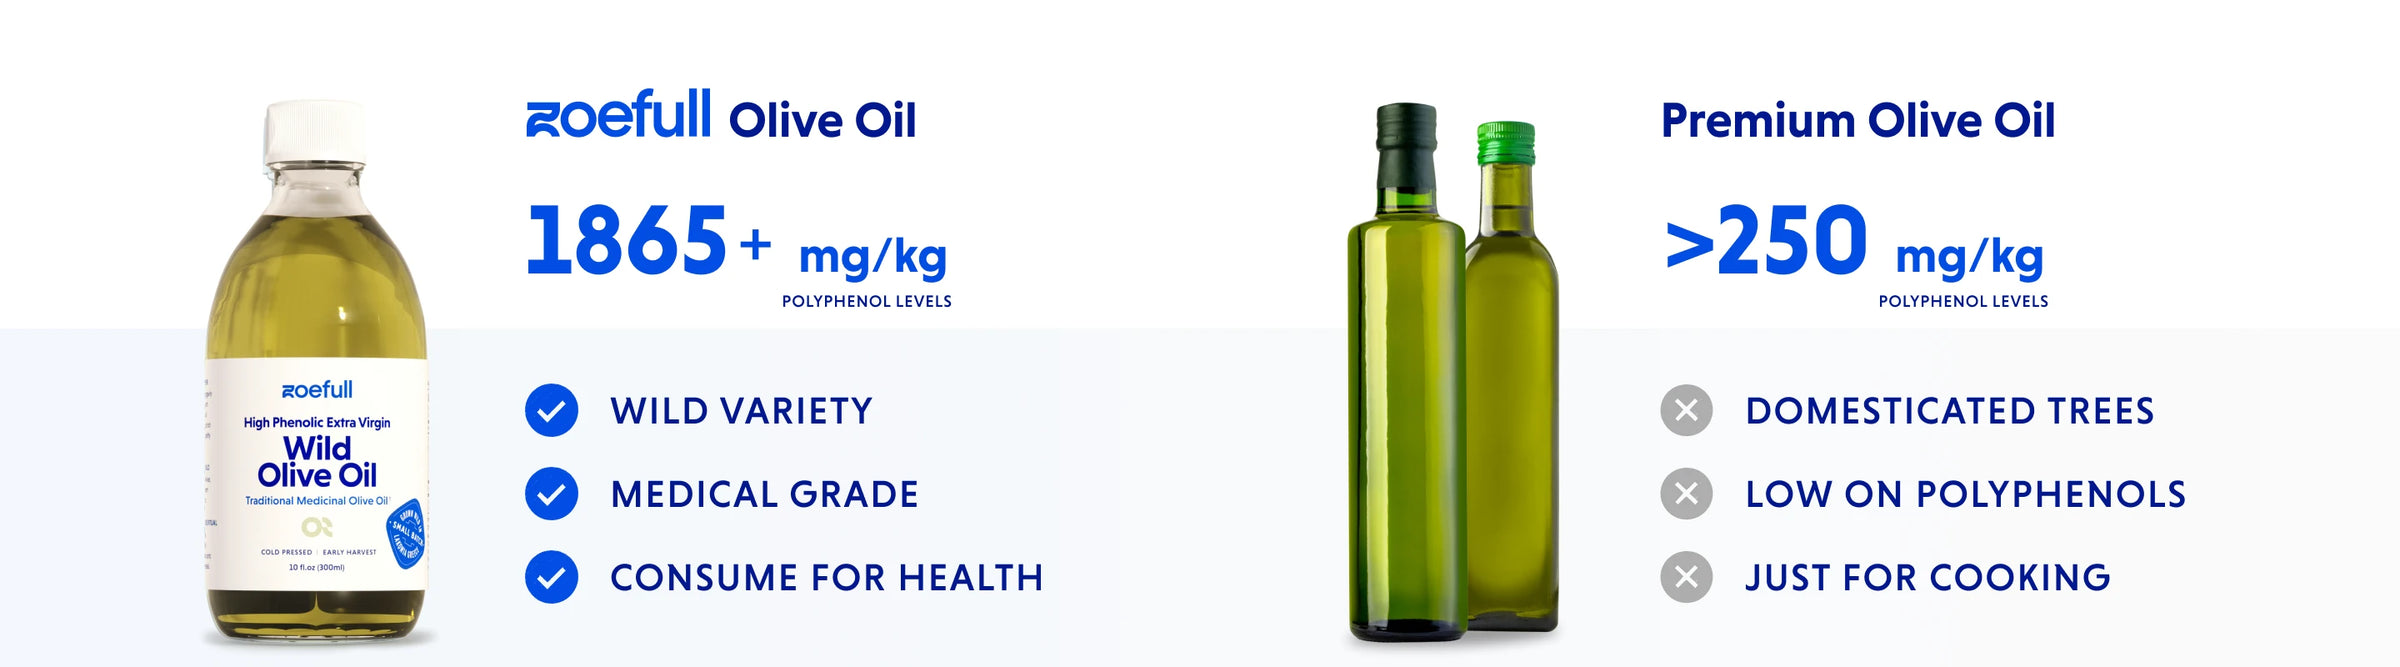 A comparison image showing zoefull's wild olive oil against other generic premium olive oils. Zoefull's wild olive oil is of wild variety, is medical grade and is used for health purposes whereas the other olive oils come from domesticated trees, are low on polyphenols and are for cooking. The polyphenol comparison is also shown. Zoefull wild olive oil has 1865mg/kg and the generic premium olive oil just over than 250mg/kg.